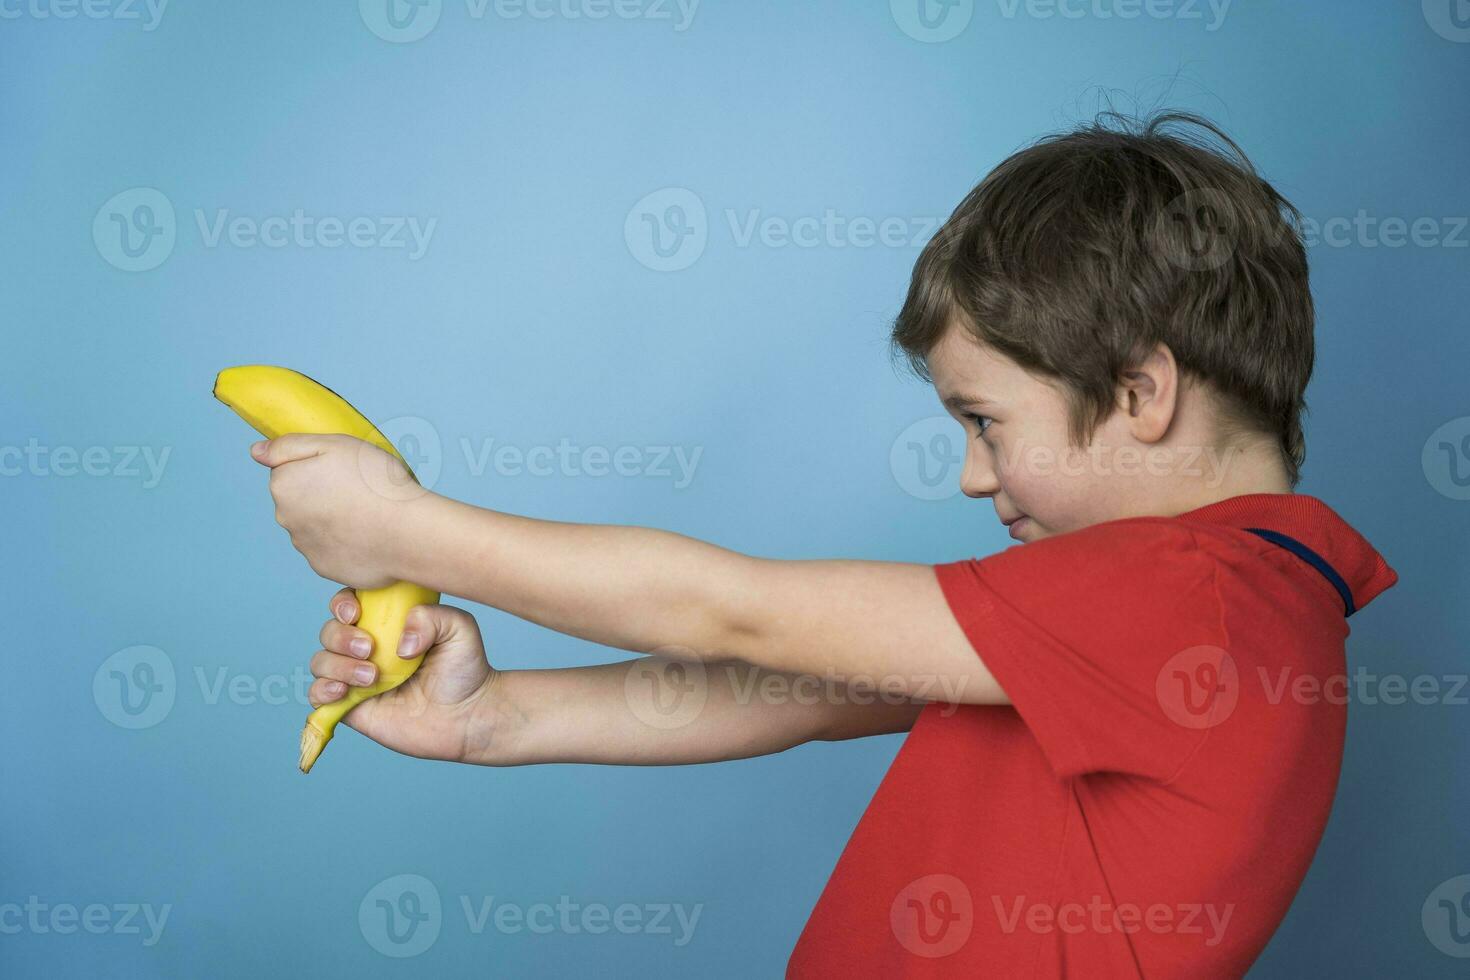 a cute Caucasian boy in a red T-shirt aggressively and cheerfully shoots a banana like a pistol. photo